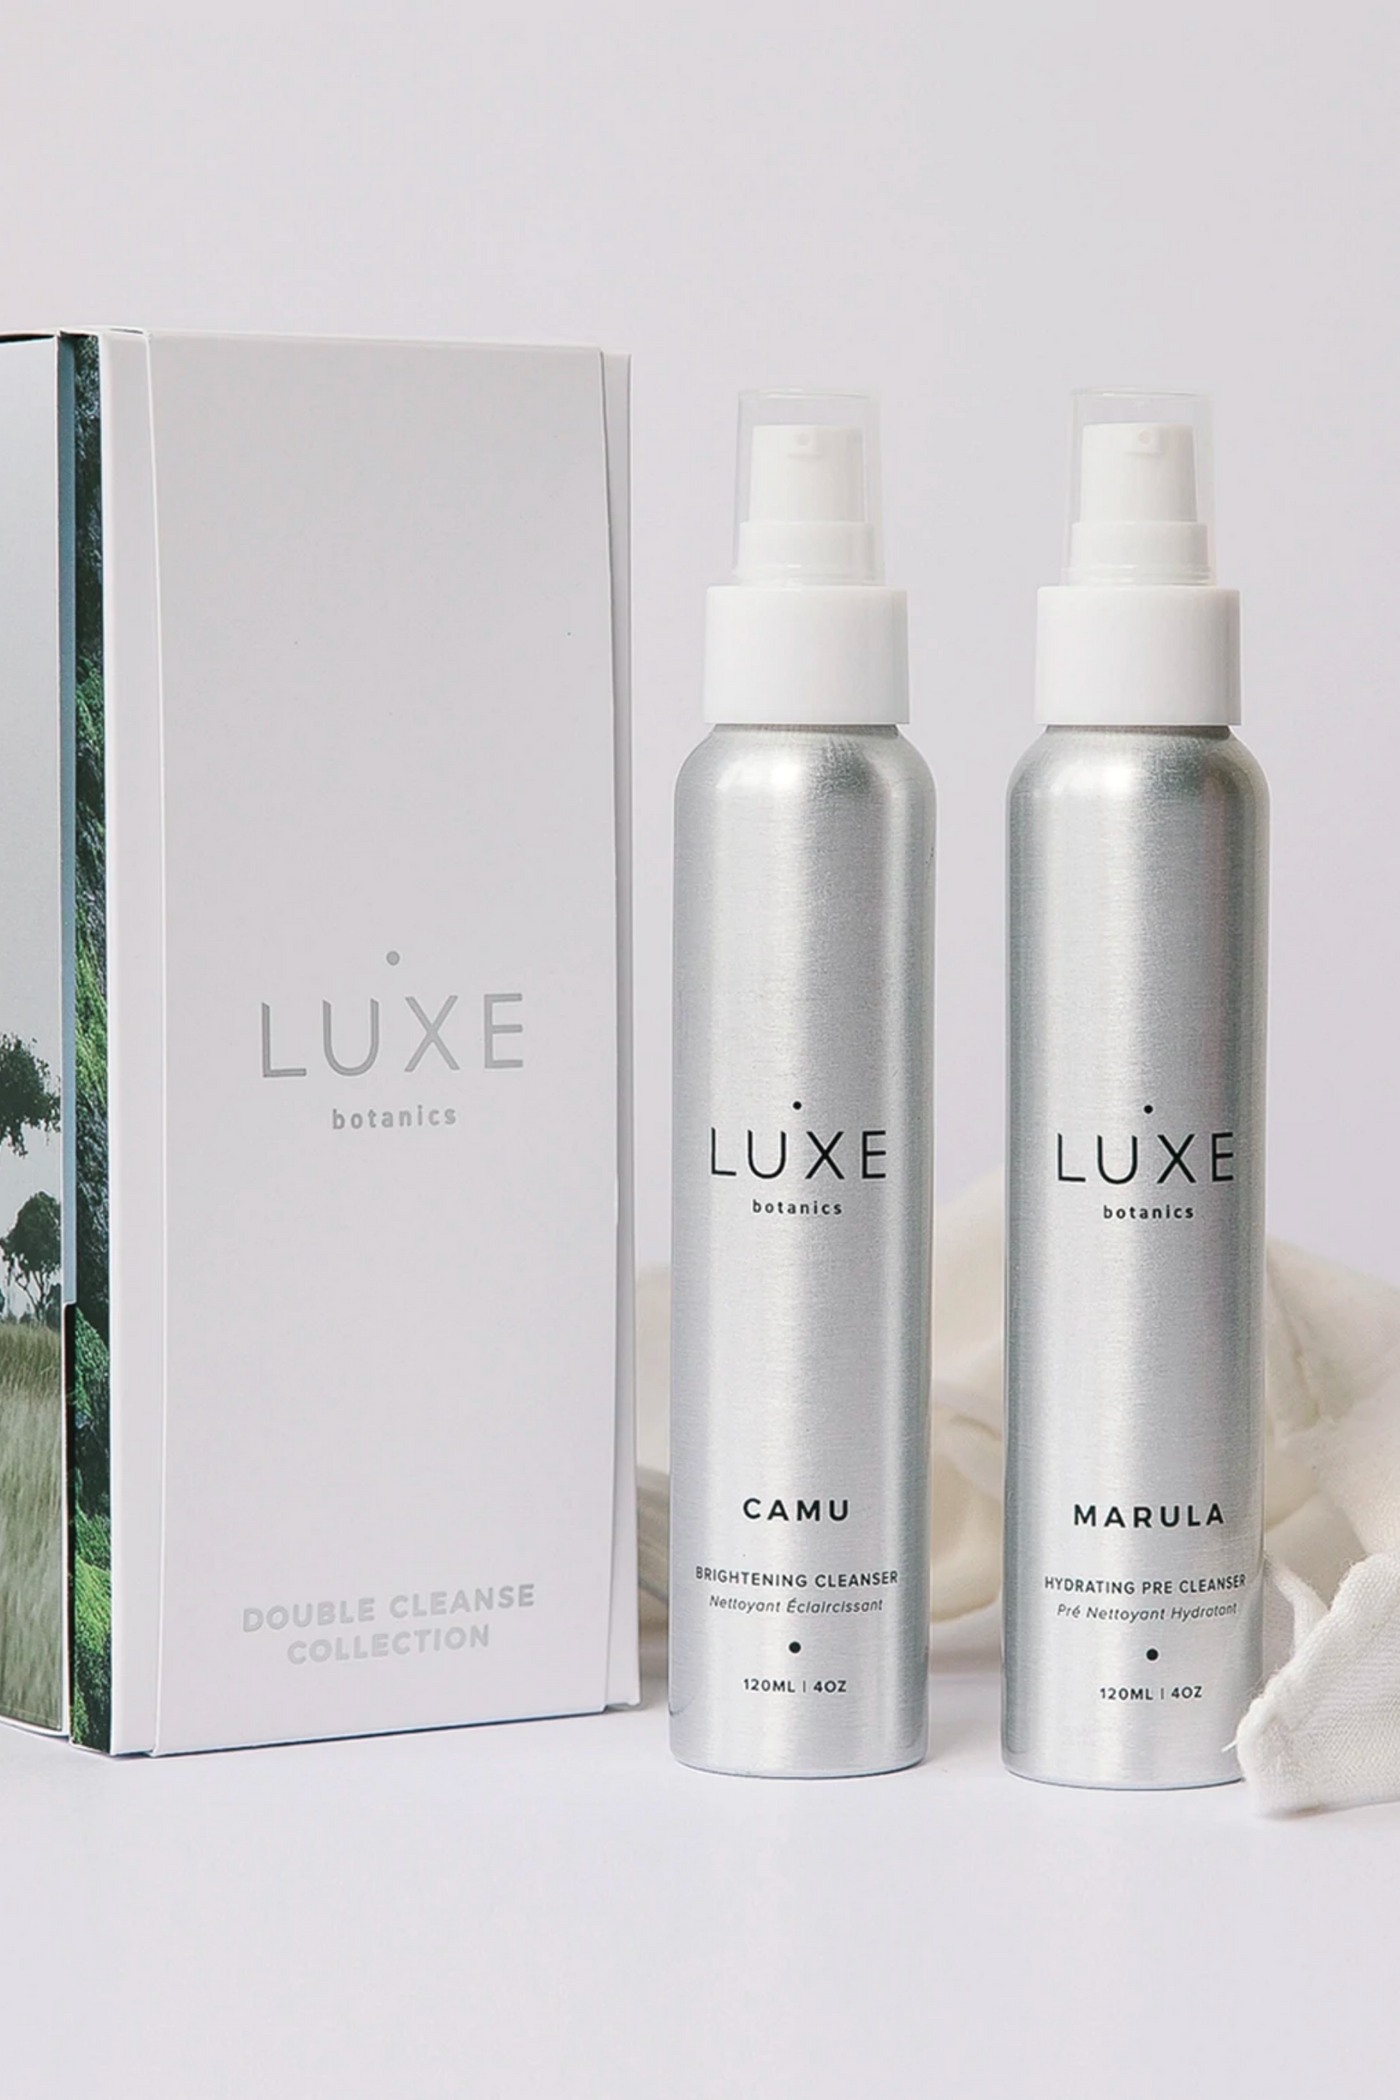 Luxe Botanics Double Cleanse Collection, available on ZERRIN with free Singapore shipping